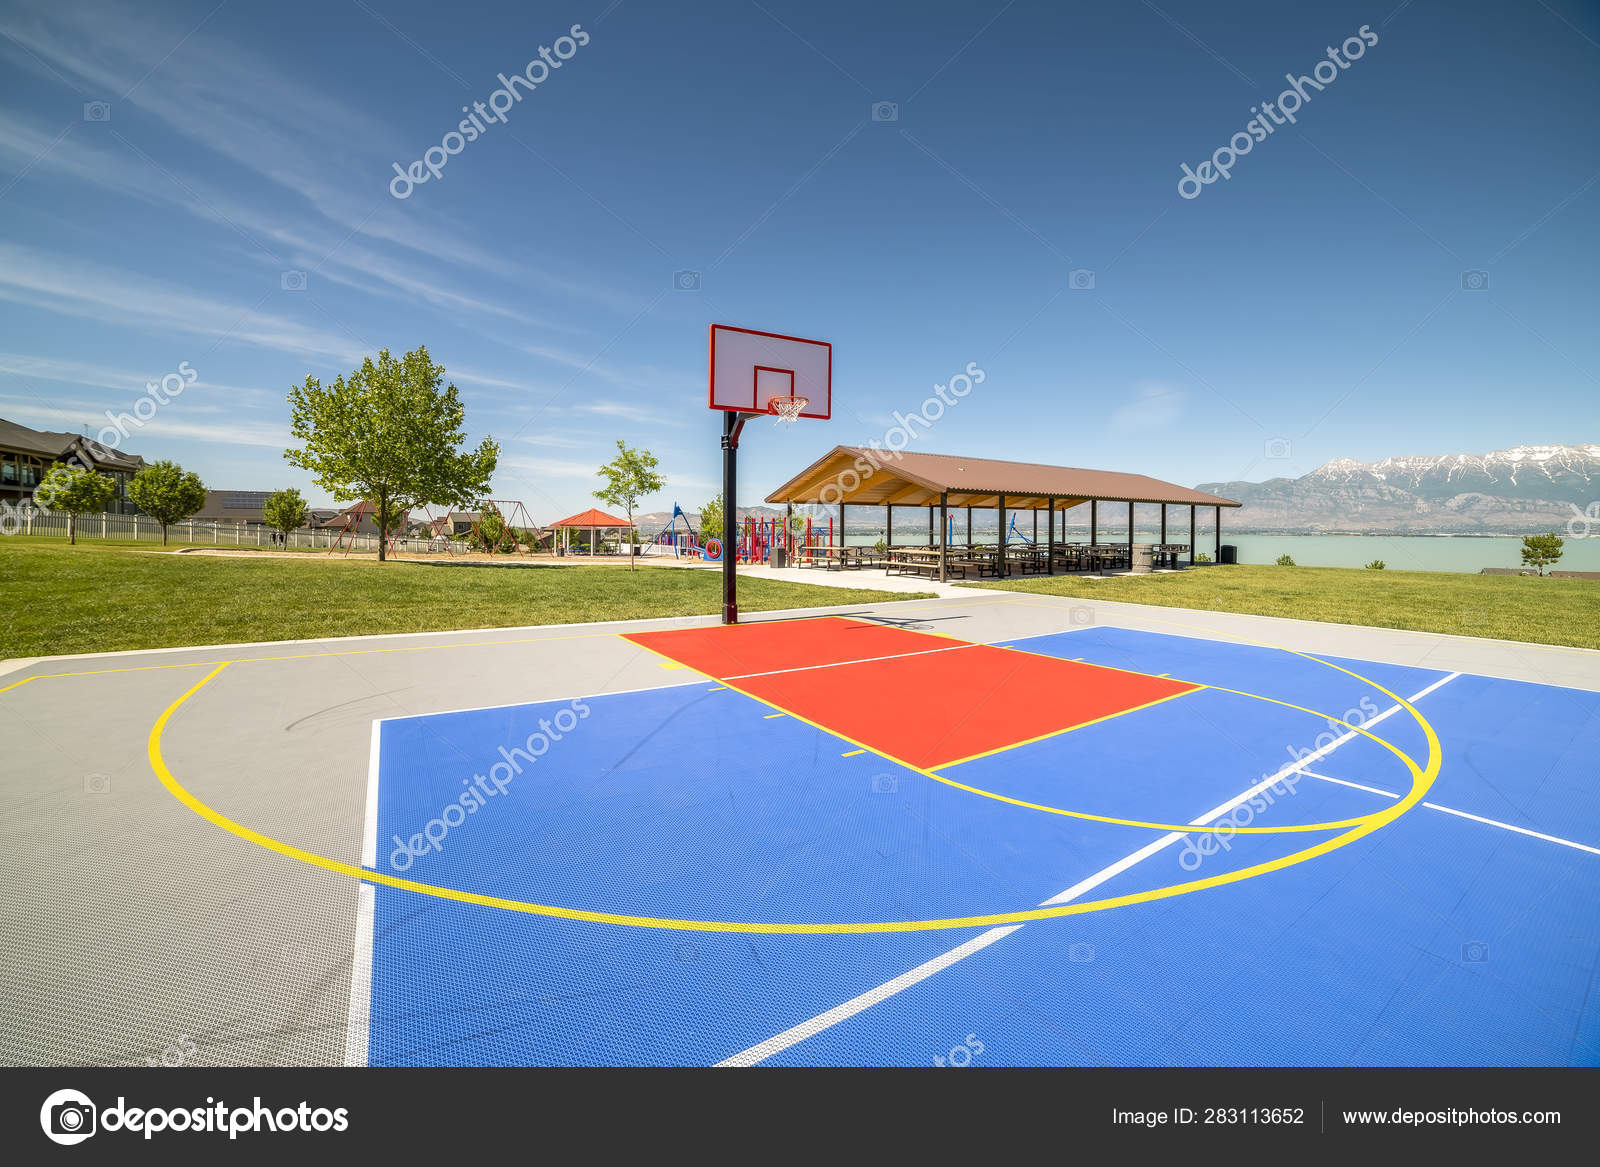 Outdoor basketball court with a picnic pavilion and playground in the  background Stock Photo by 283113652